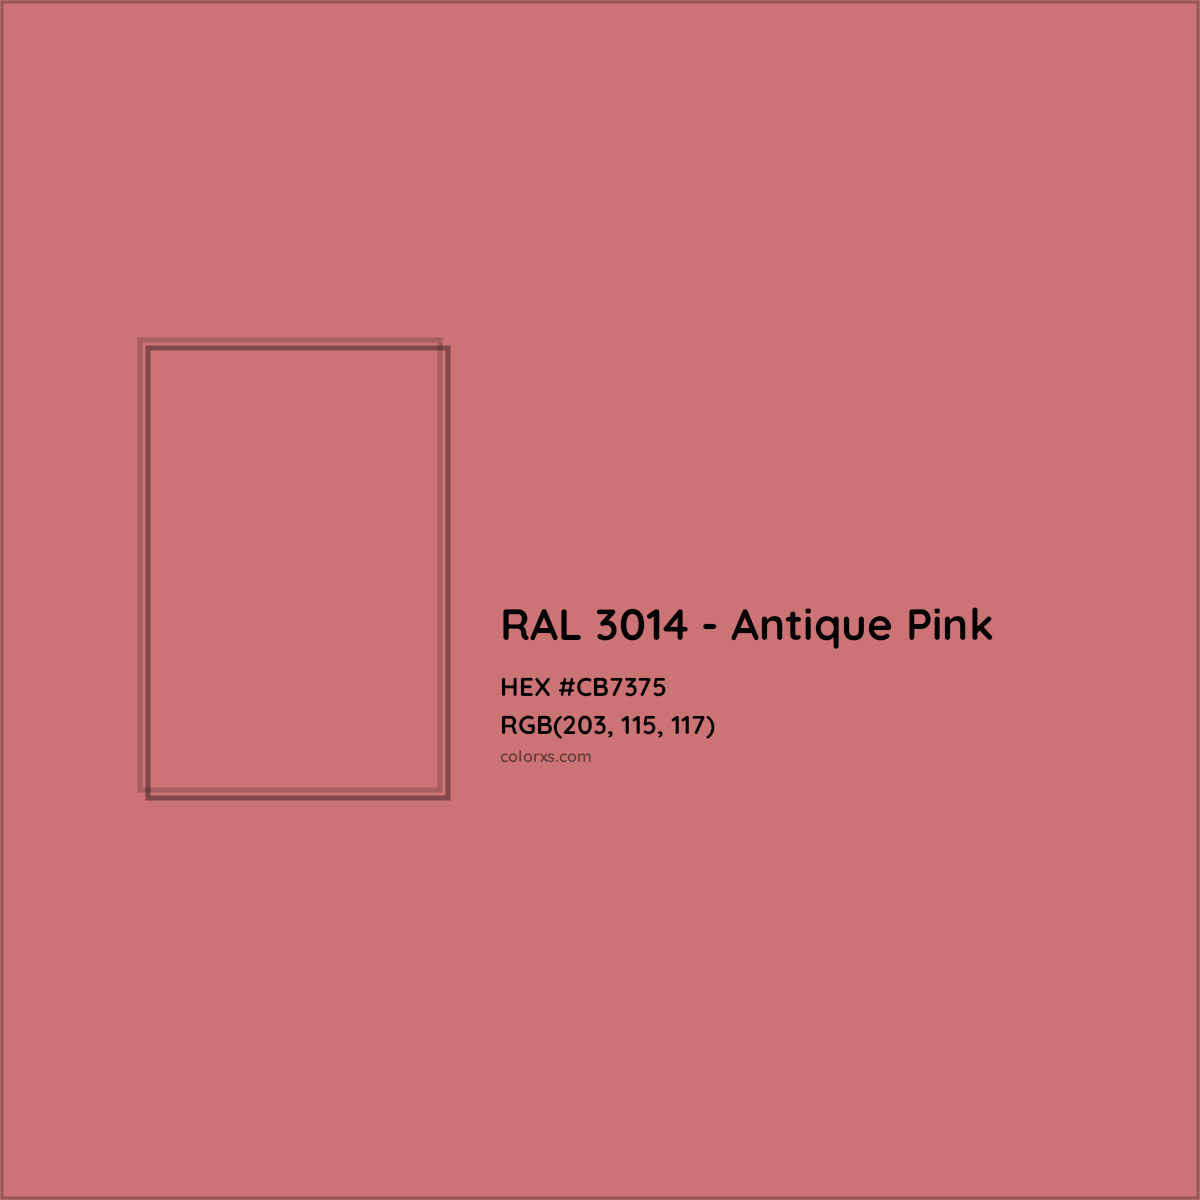 HEX #CB7375 RAL 3014 - Antique Pink CMS RAL Classic - Color Code